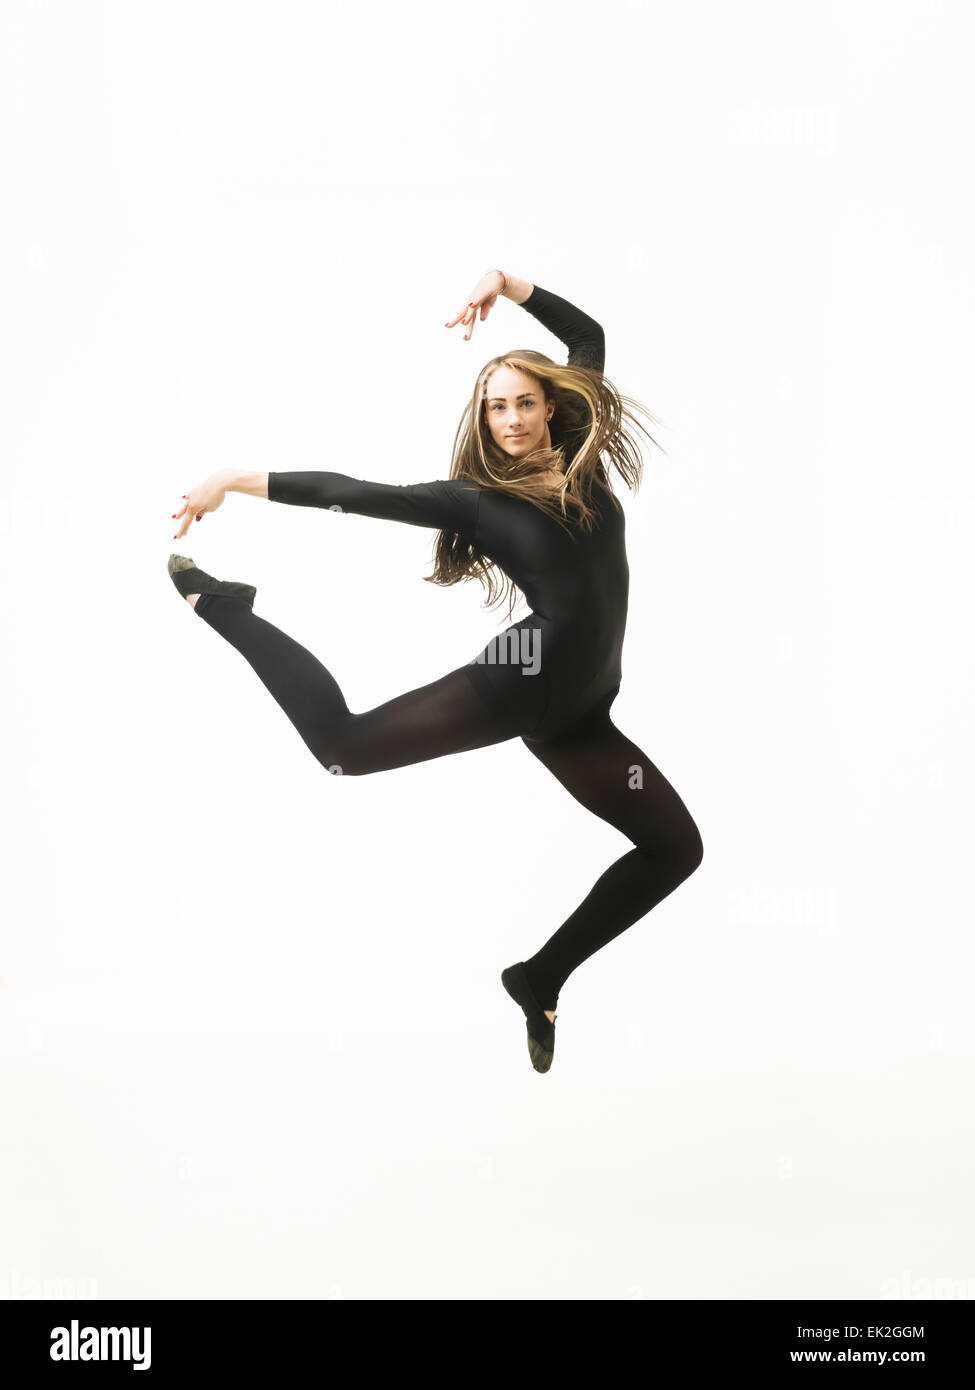 young modern ballet dancer jumping on white background Stock Photo